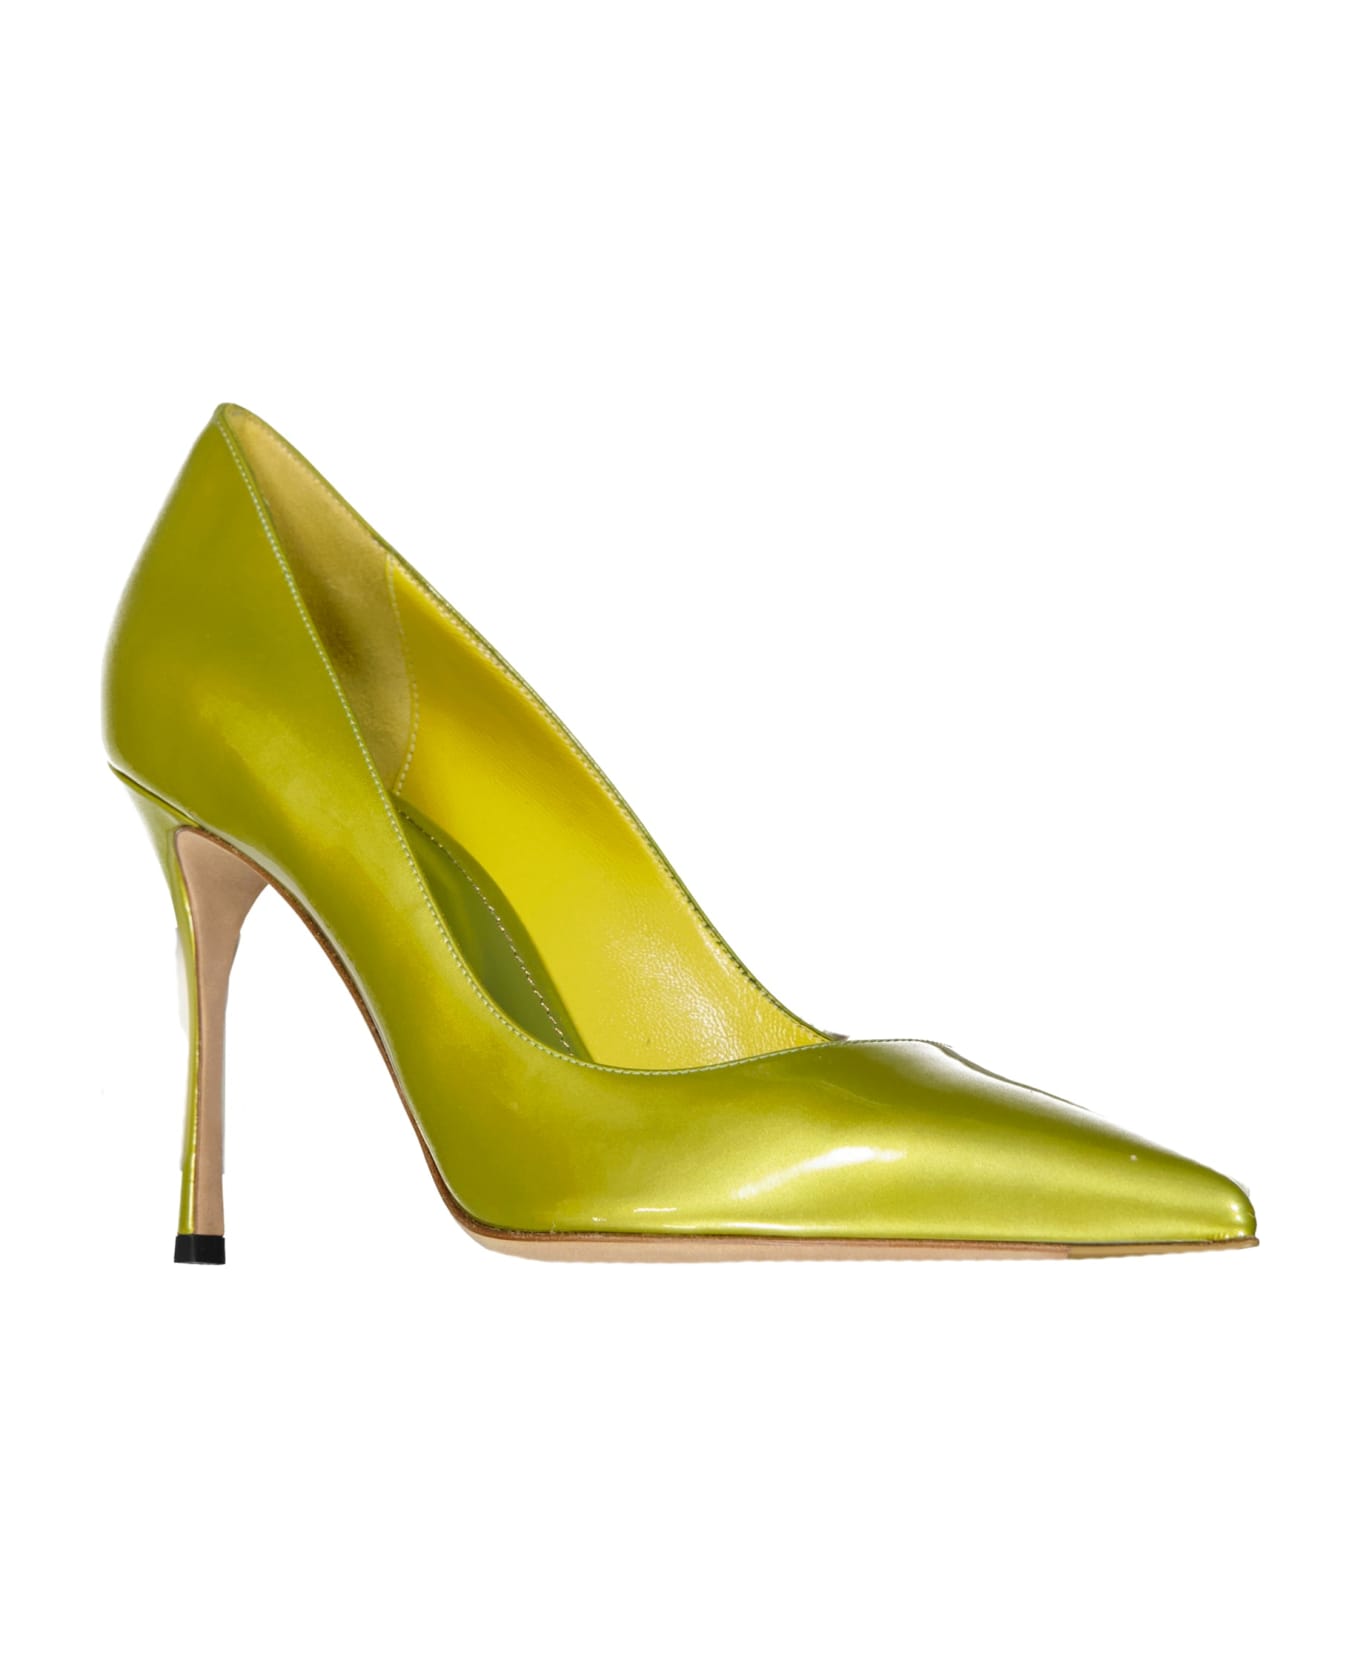 Sergio Rossi Leather Pumps - Green ハイヒール